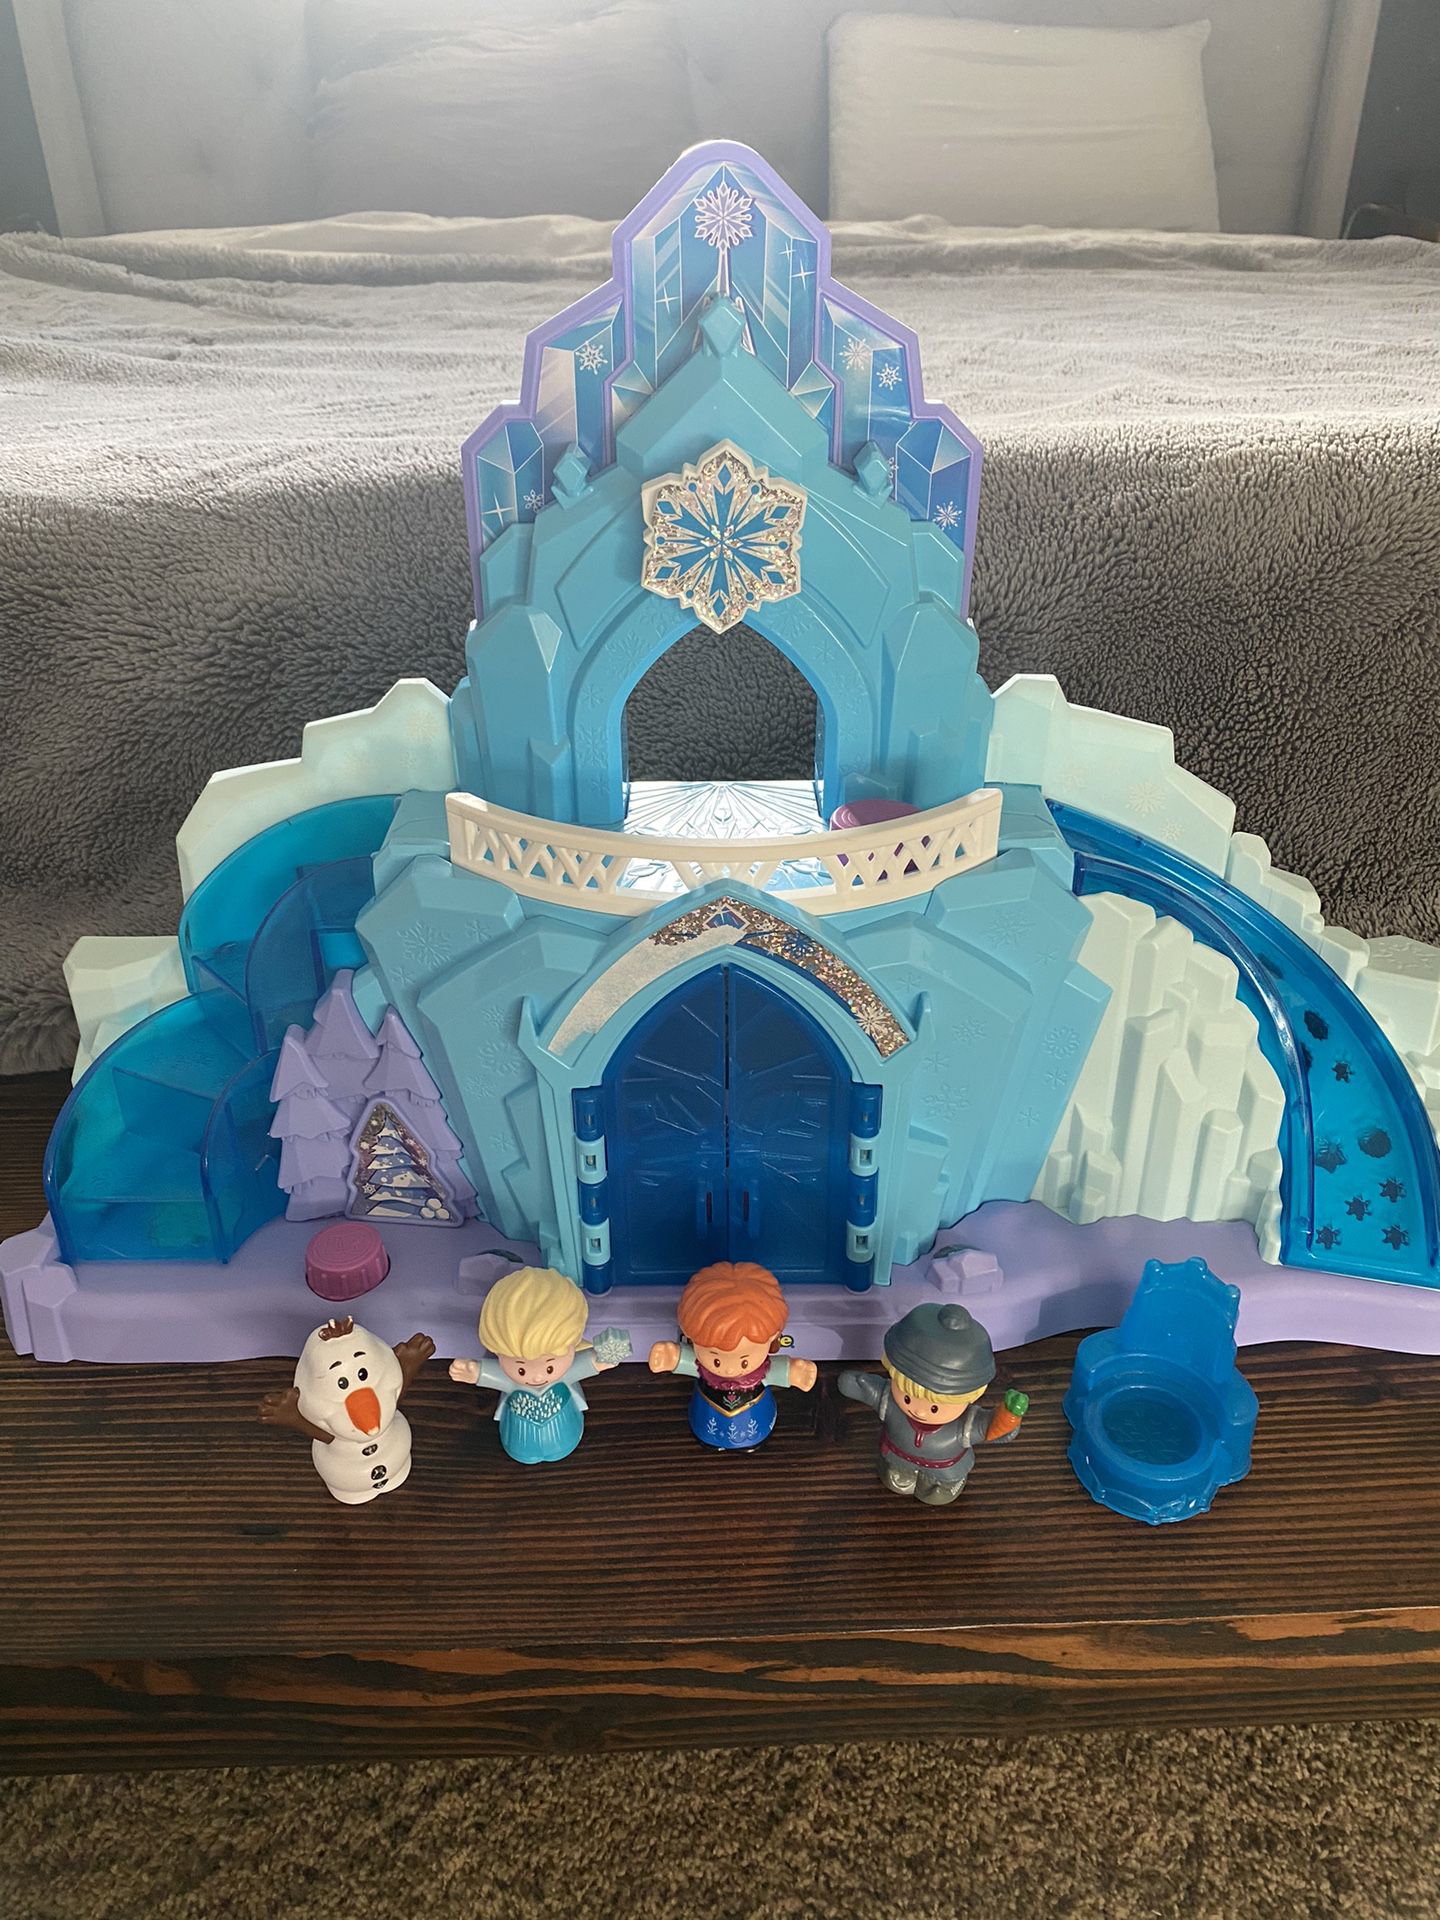 Frozen Castle - Frozen Toy - Fisher Price Little People - Baby Toy - Toddler Toy - Kids Toys - Toys - Elsa - Anna